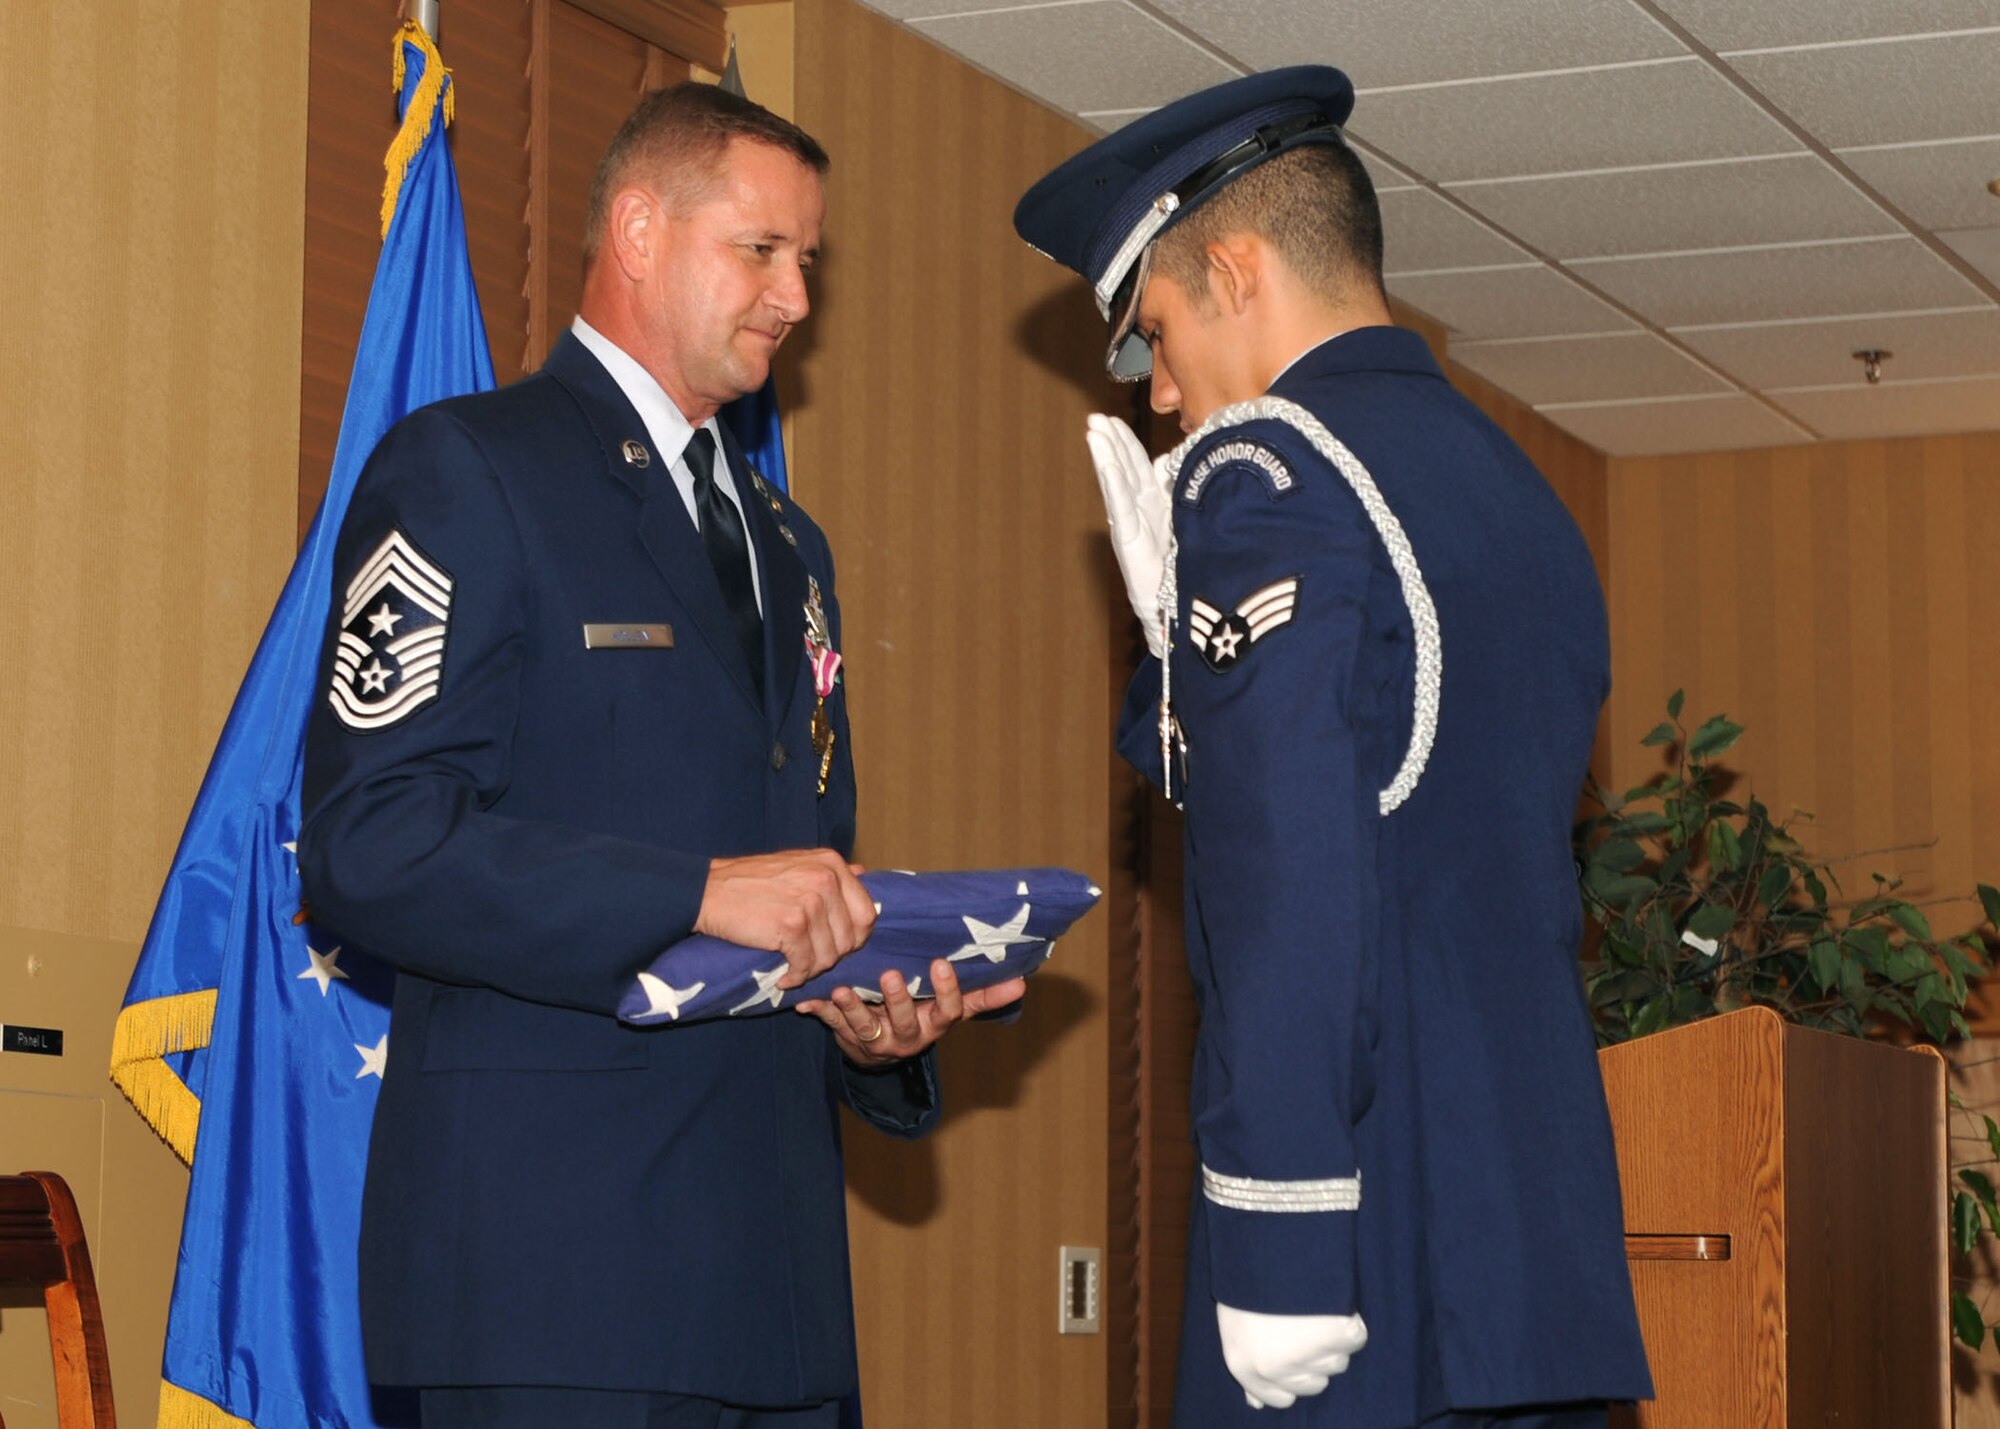 DAVIS-MONTHAN AIR FORCE BASE, Ariz. -- Chief Master Sgt. Lloyd Hollen (left), 12th Air Force (Air Forces Southern) command chief, recieves the colors during his retirement ceremony here Aug 14.  Chief Hollen retired after nearly 29 years of active service.  (U.S. Air Force photo by Airman 1st Class Brittany Dowdle)